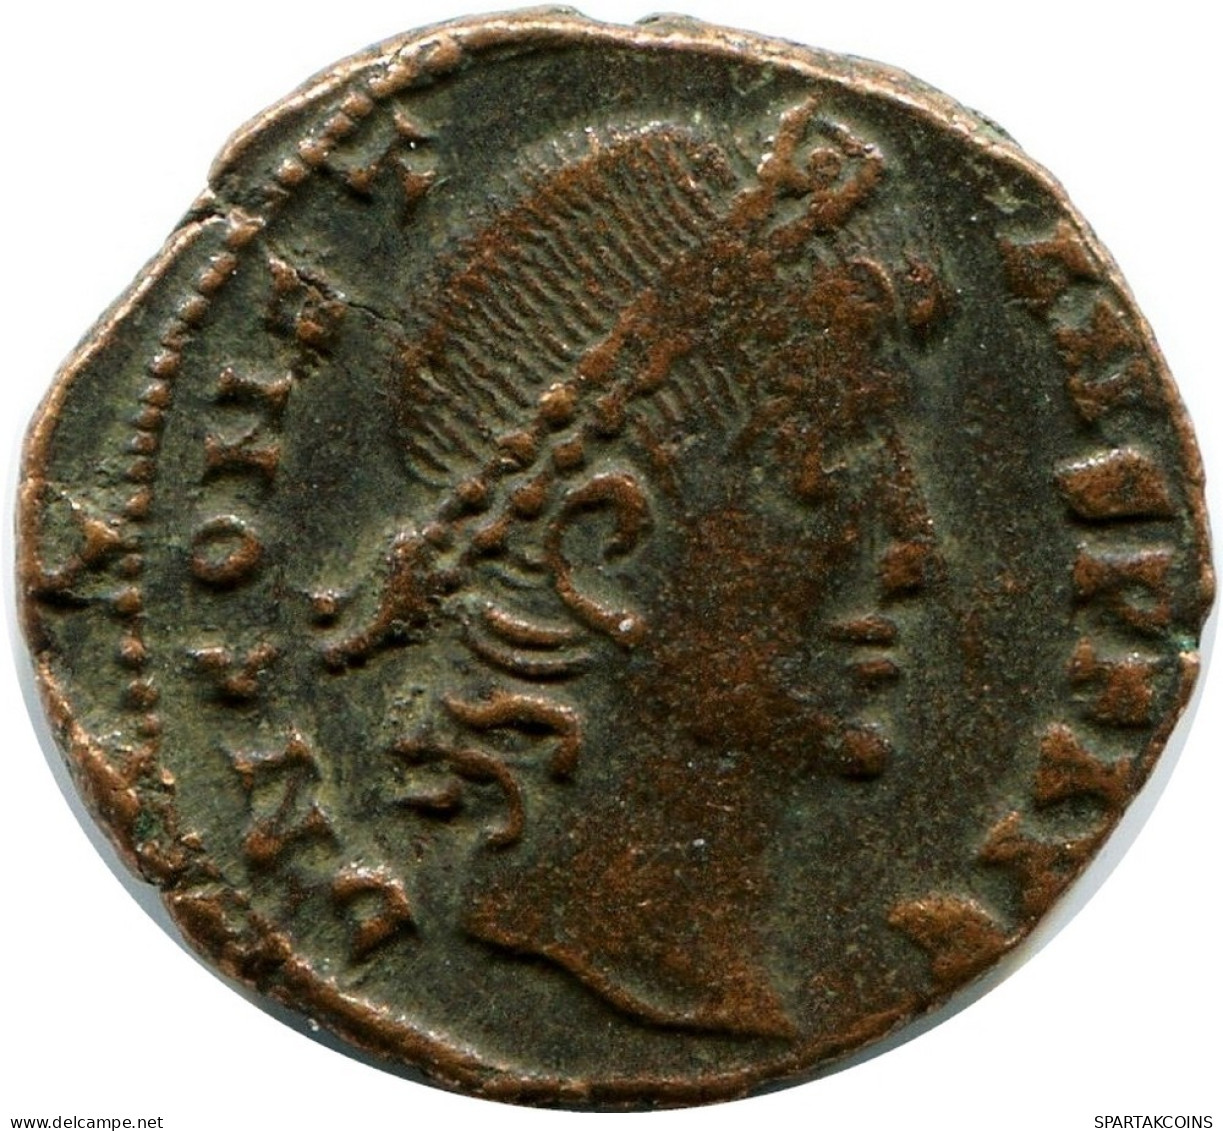 CONSTANS MINTED IN ALEKSANDRIA FOUND IN IHNASYAH HOARD EGYPT #ANC11435.14.D.A - The Christian Empire (307 AD Tot 363 AD)